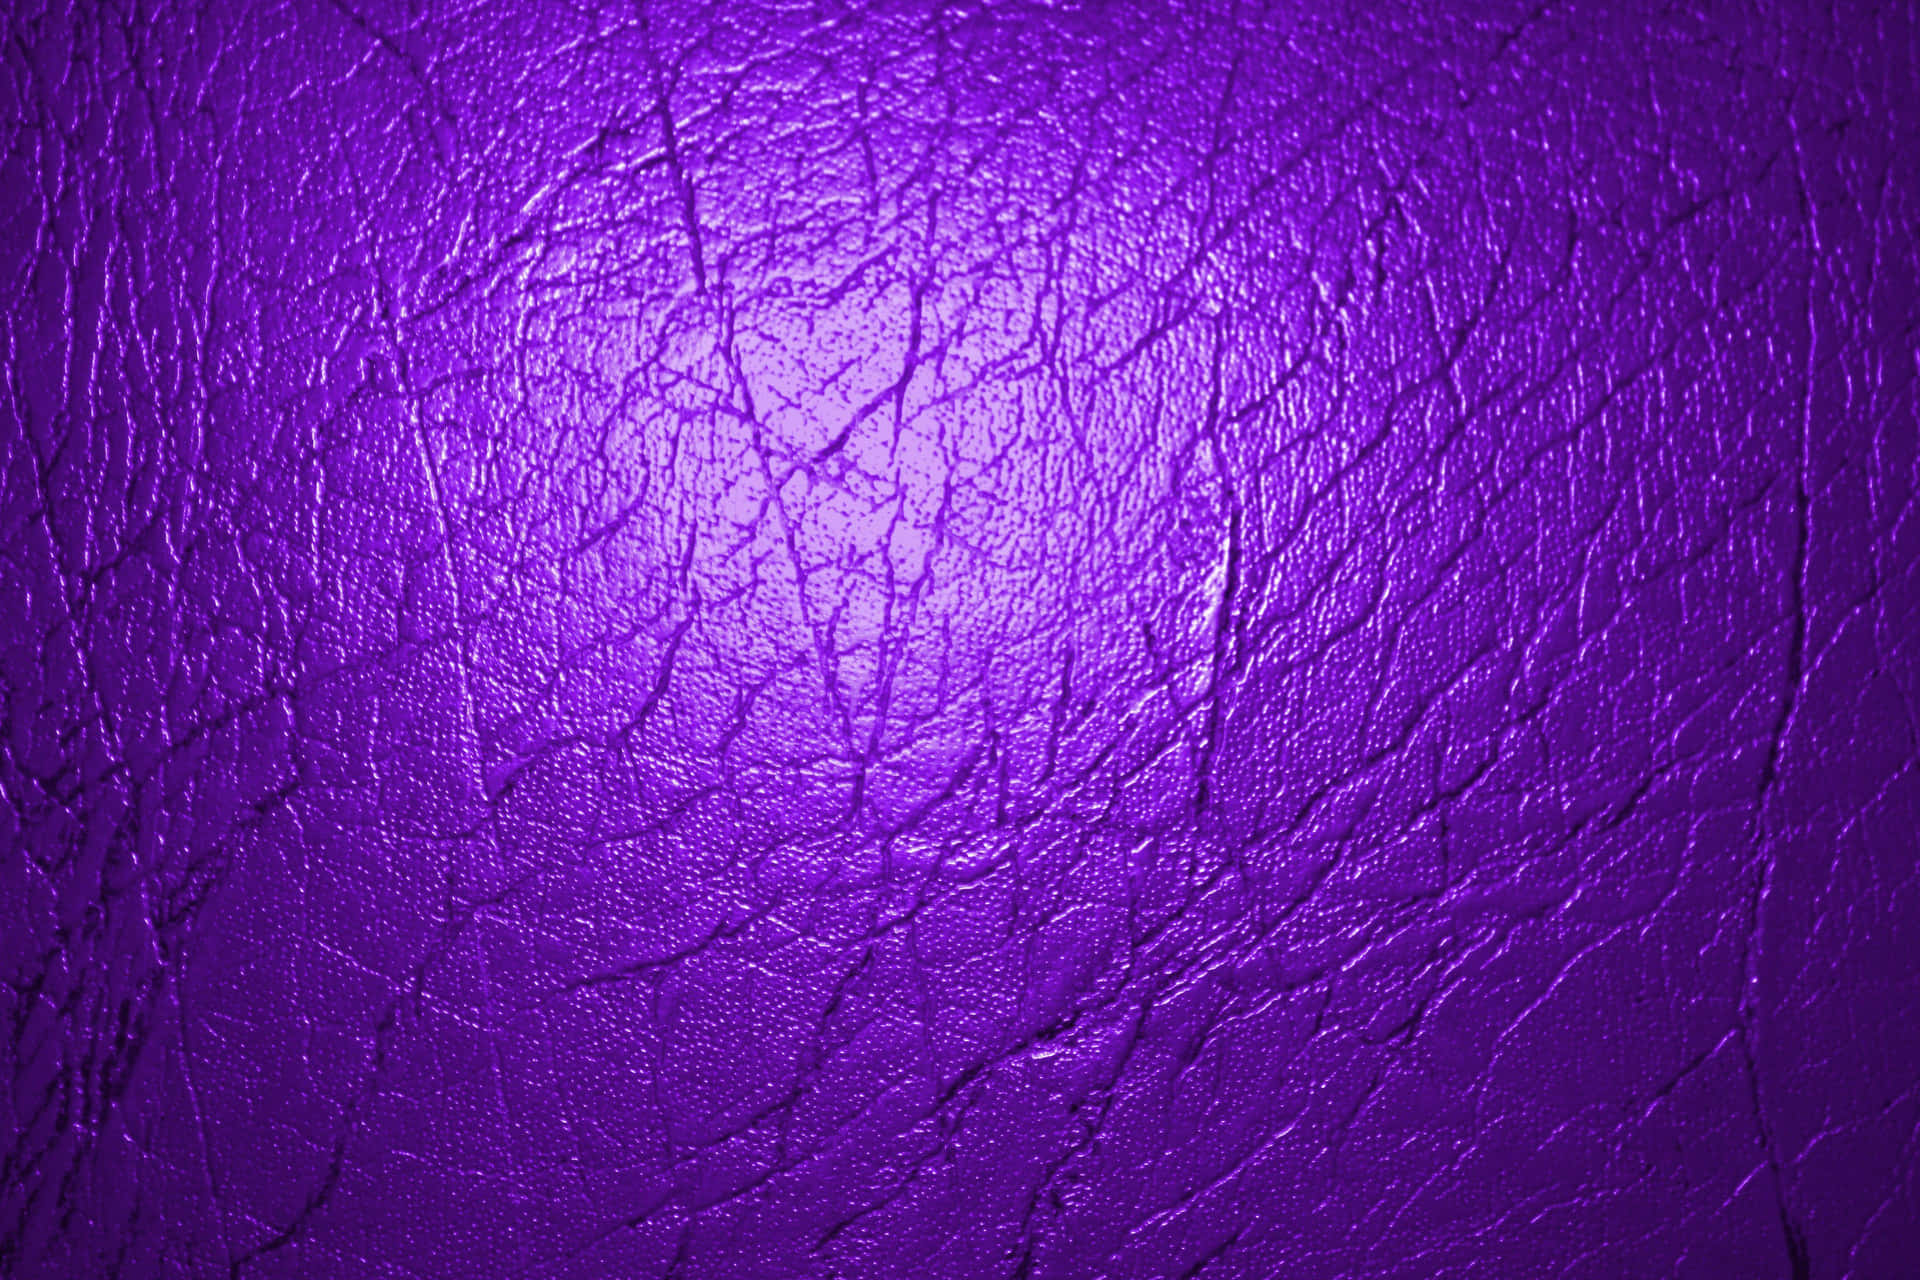 A vibrant purple textured background